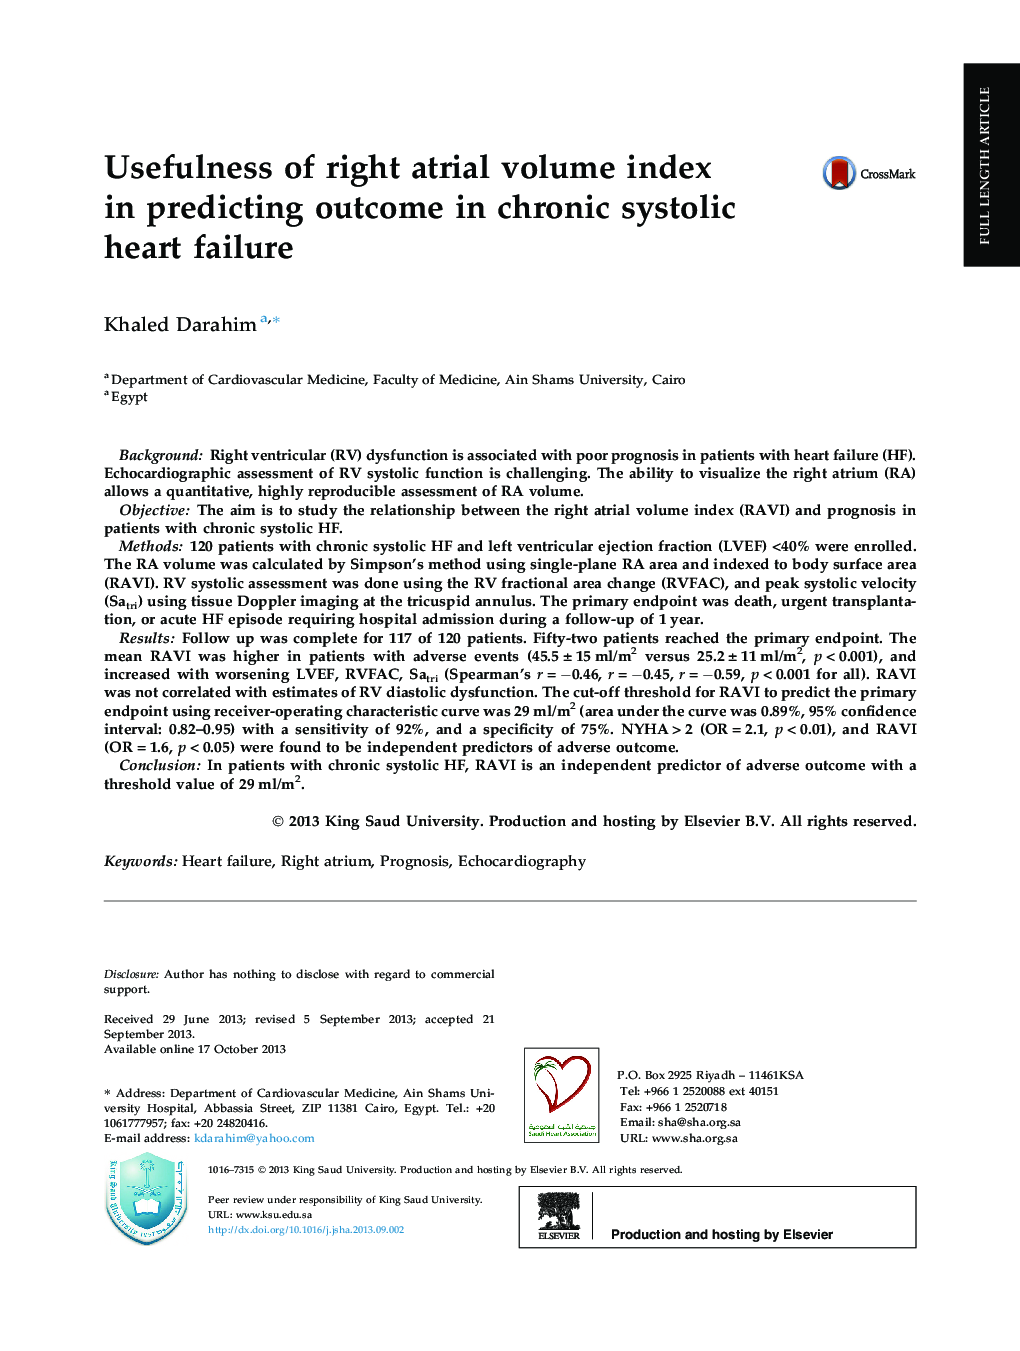 Usefulness of right atrial volume index in predicting outcome in chronic systolic heart failure 